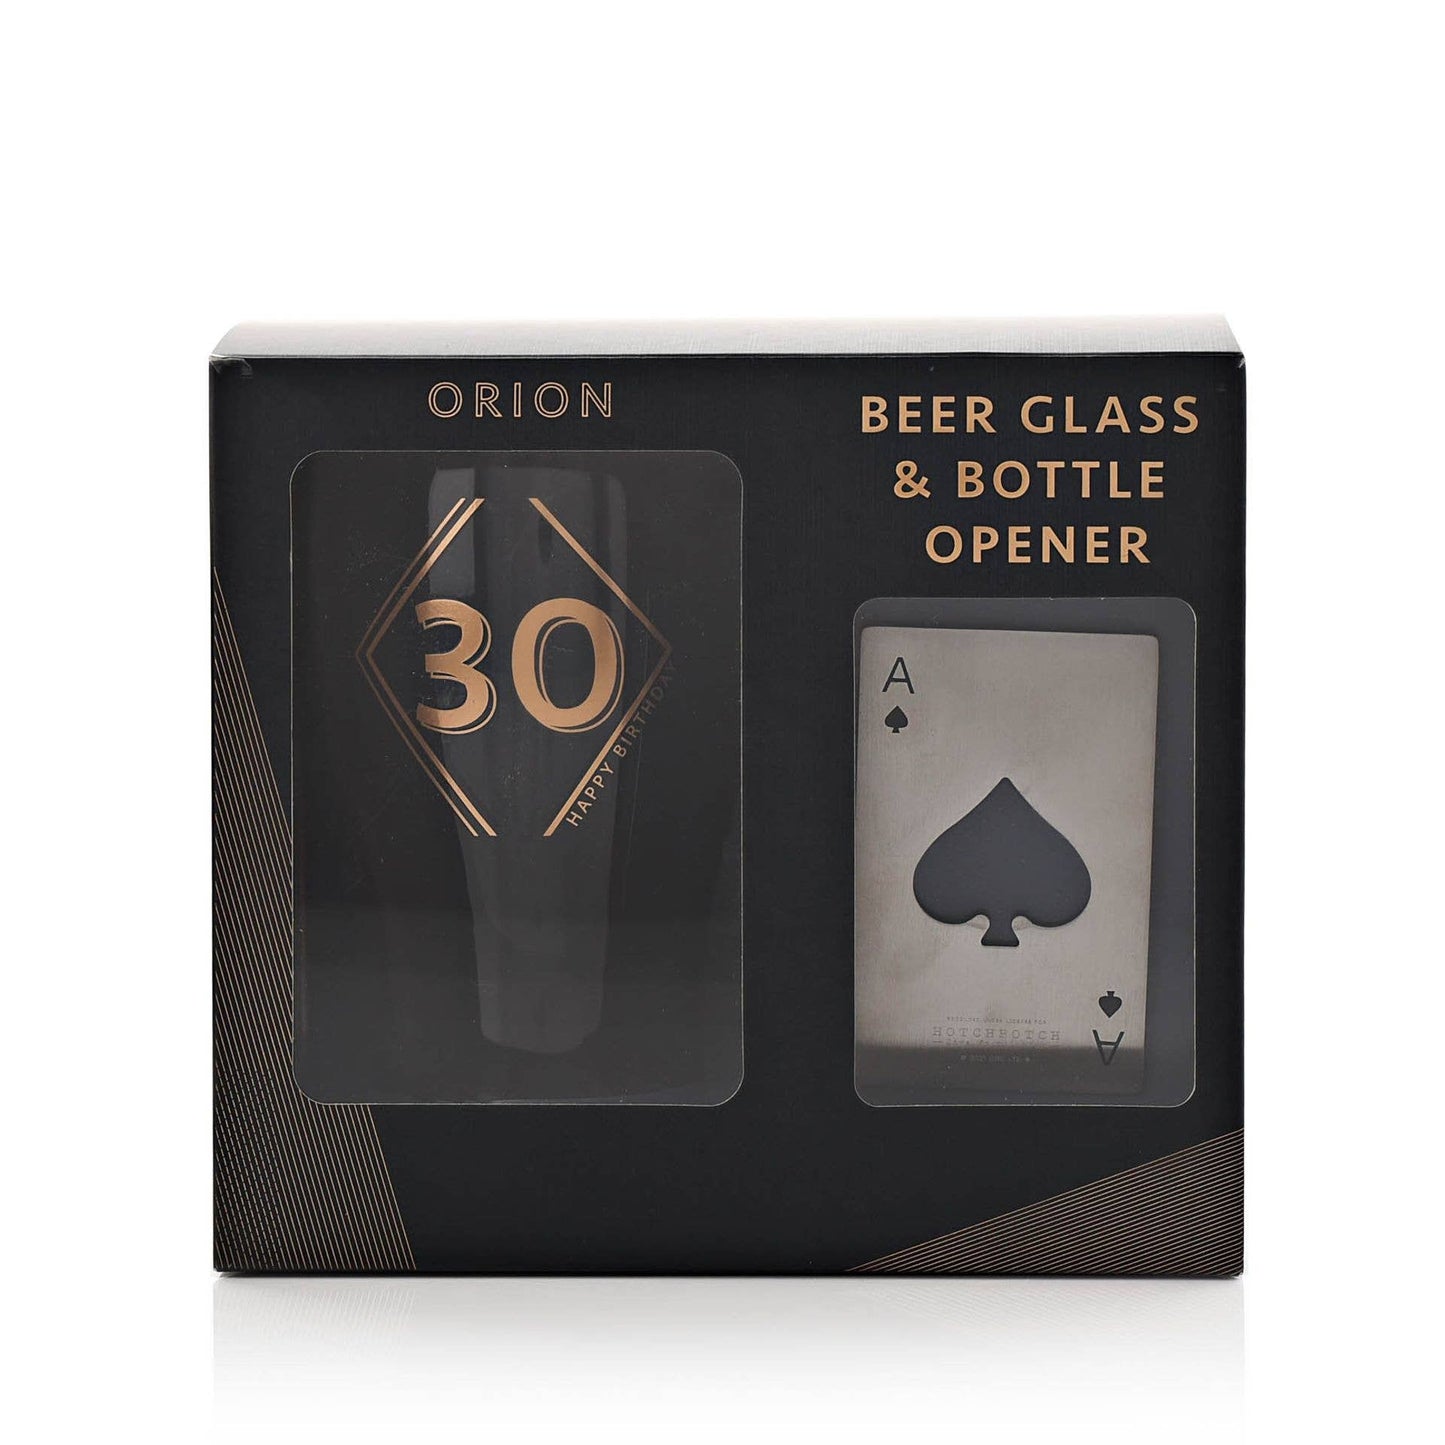 WIDDOP and Co. - Hotchpotch Orion Beer Glass & Bottle Opener - 30